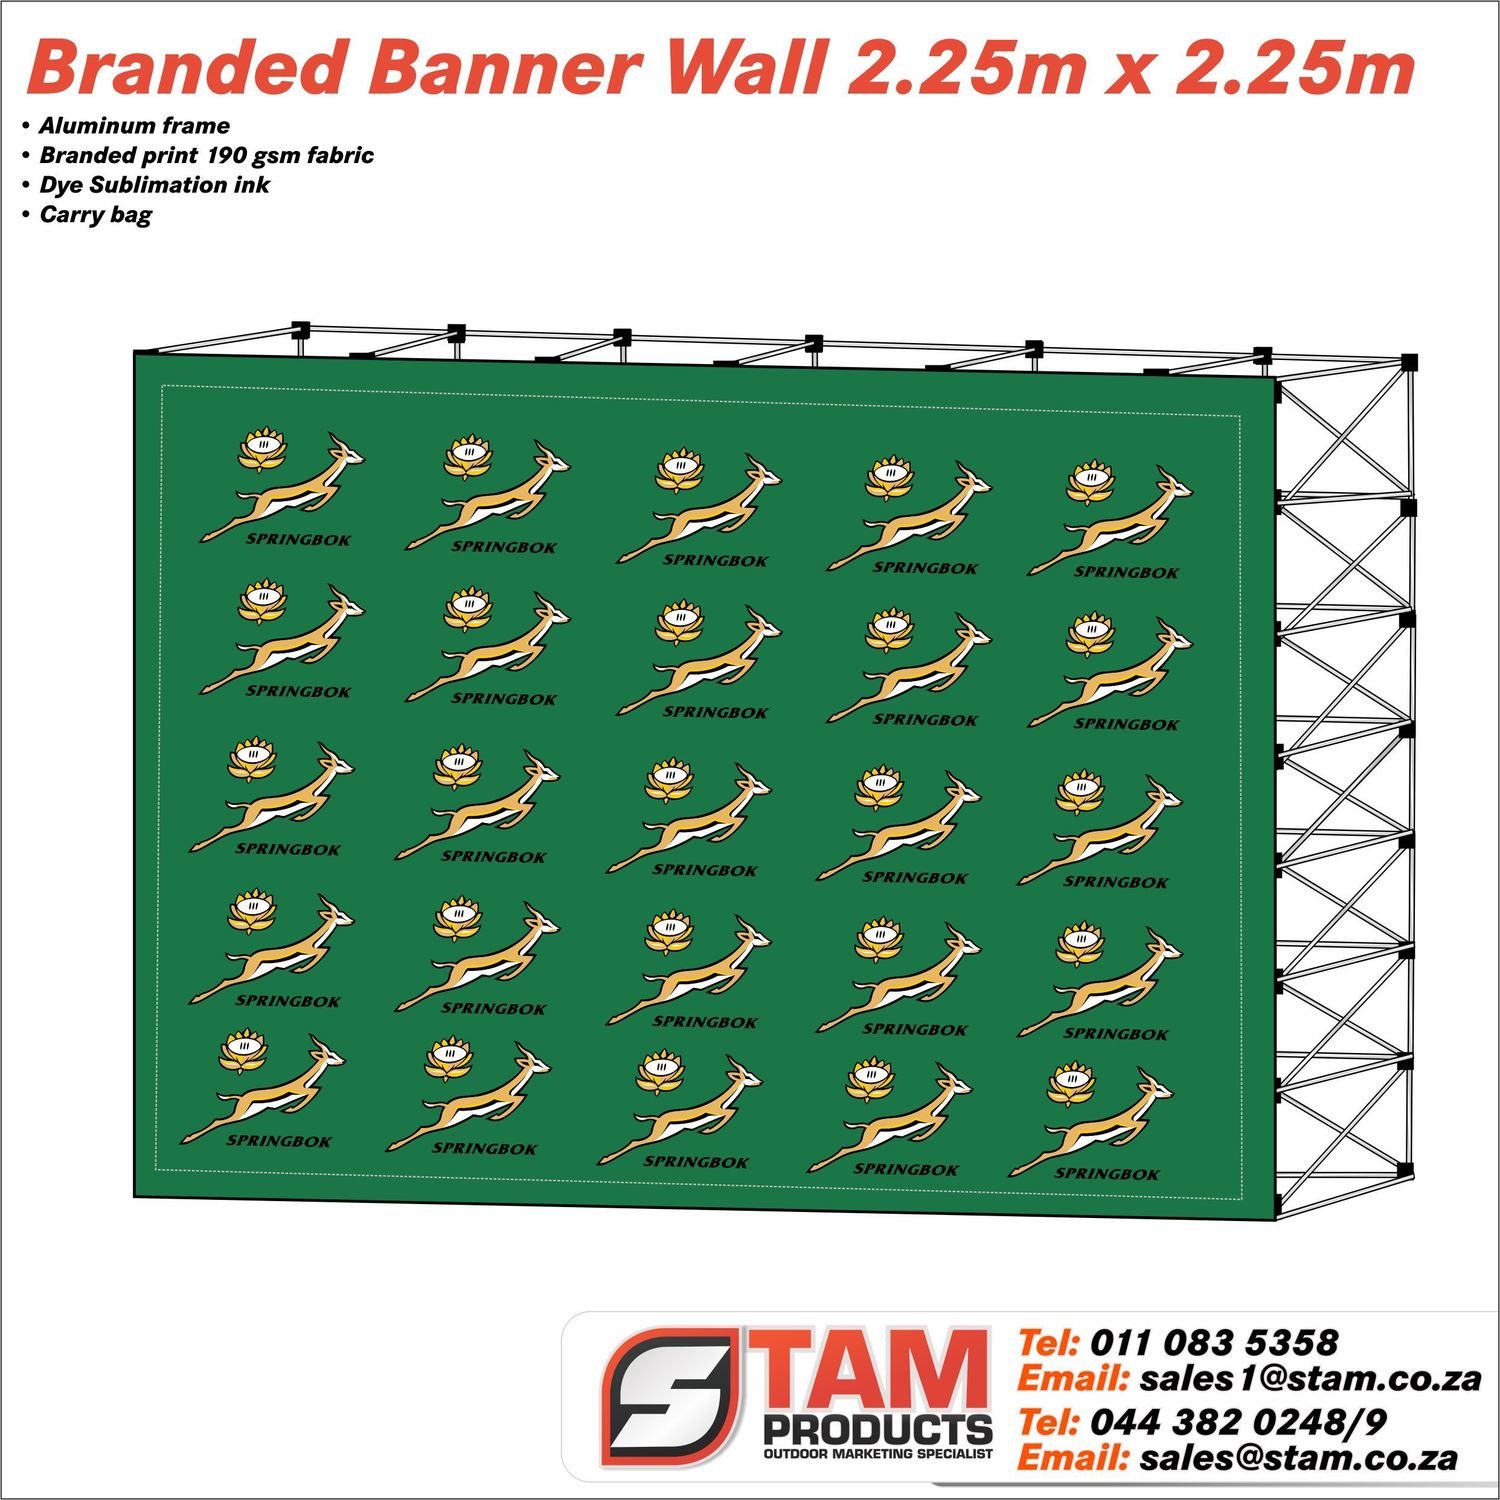 Branded Banner Walls | Stam Products